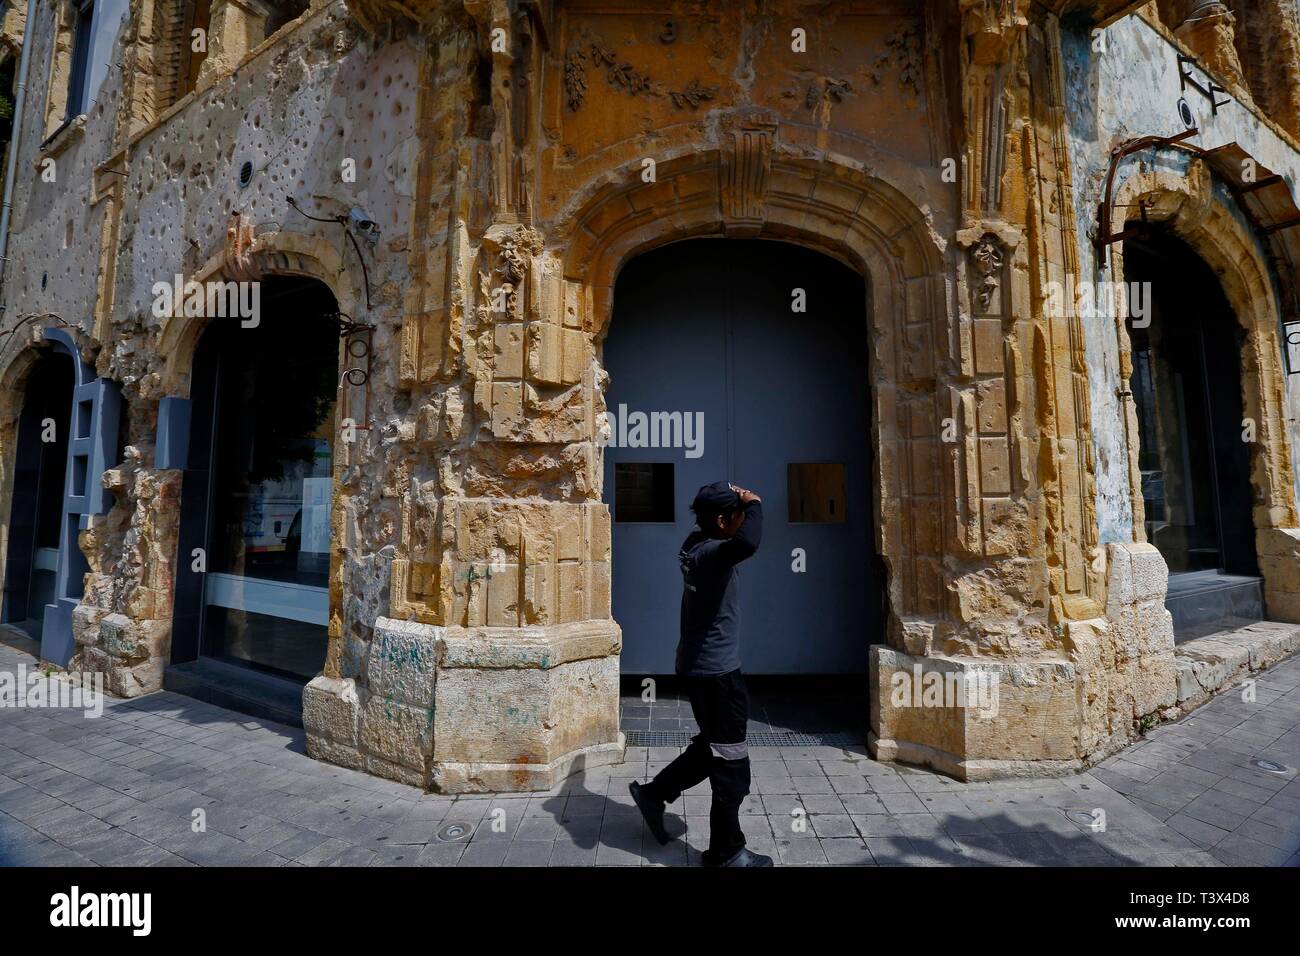 (190412) -- BEIRUT, April 12, 2019 (Xinhua) -- A man passes by the destroyed Barakat building, which now is 'Beit Beirut' museum in Beirut, Lebanon on April 2, 2019. April 13 marks the 44th anniversary of the outbreak of Lebanon's civil war (1975-1990). But after 29 years of the end of the war, some buildings in Beirut still bear witness to this war and remain the same despite the growth of its surroundings. (Xinhua/Bilal Jawich) Stock Photo